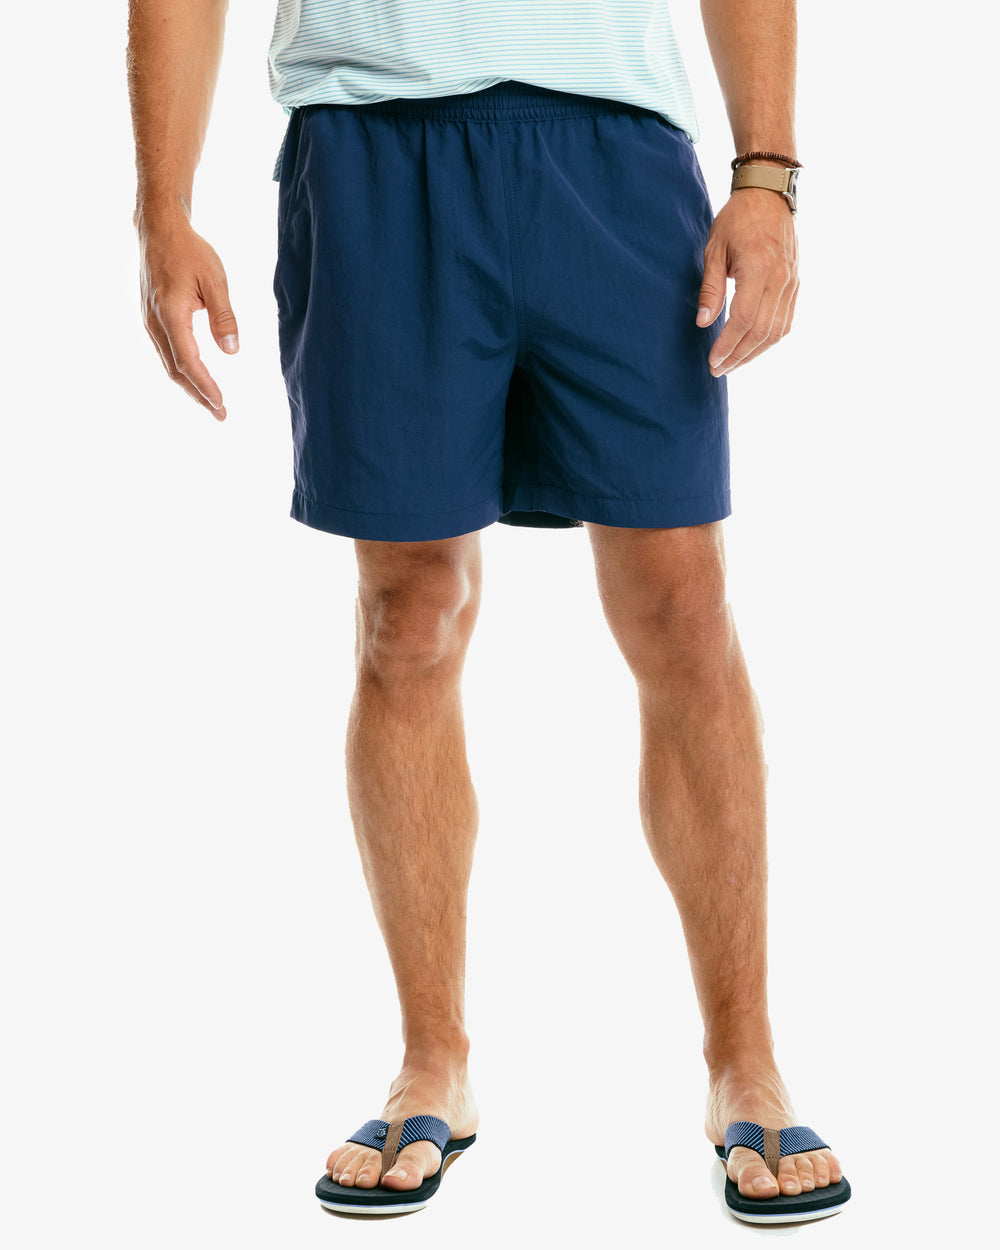 The model front view of the Men's Shoreline 6 Inch Short by Southern Tide  - True Navy